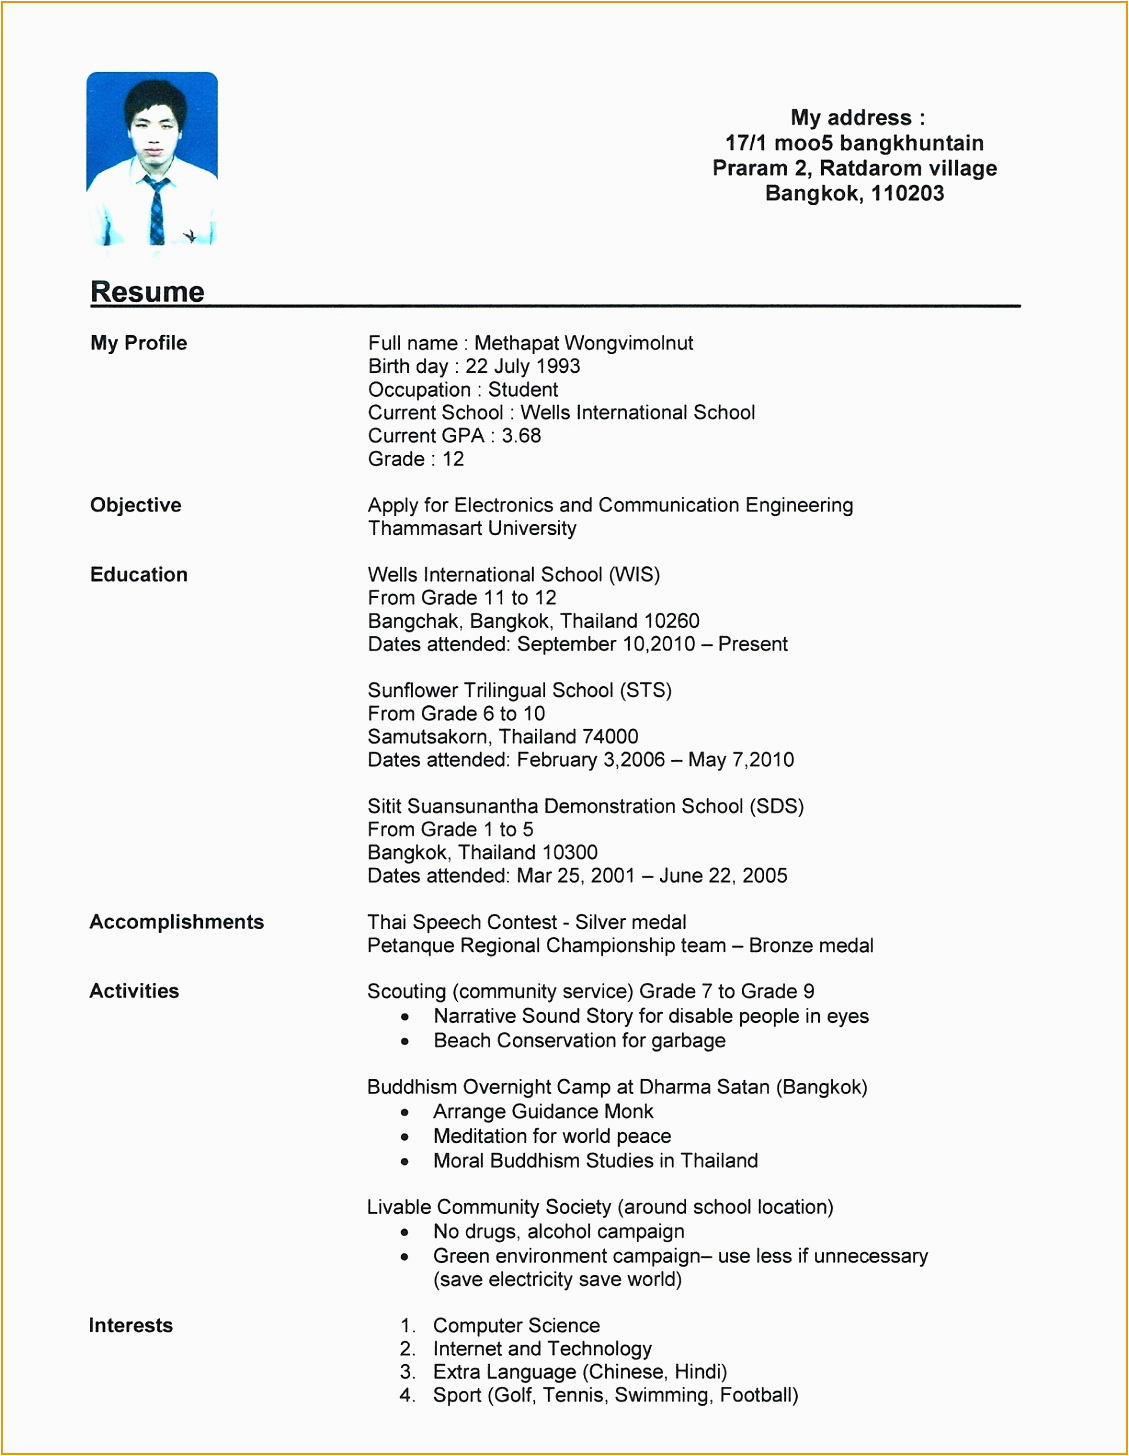 Sample Resume for Student with No Job Experience 6 Resume Templates College Student No Job Experience